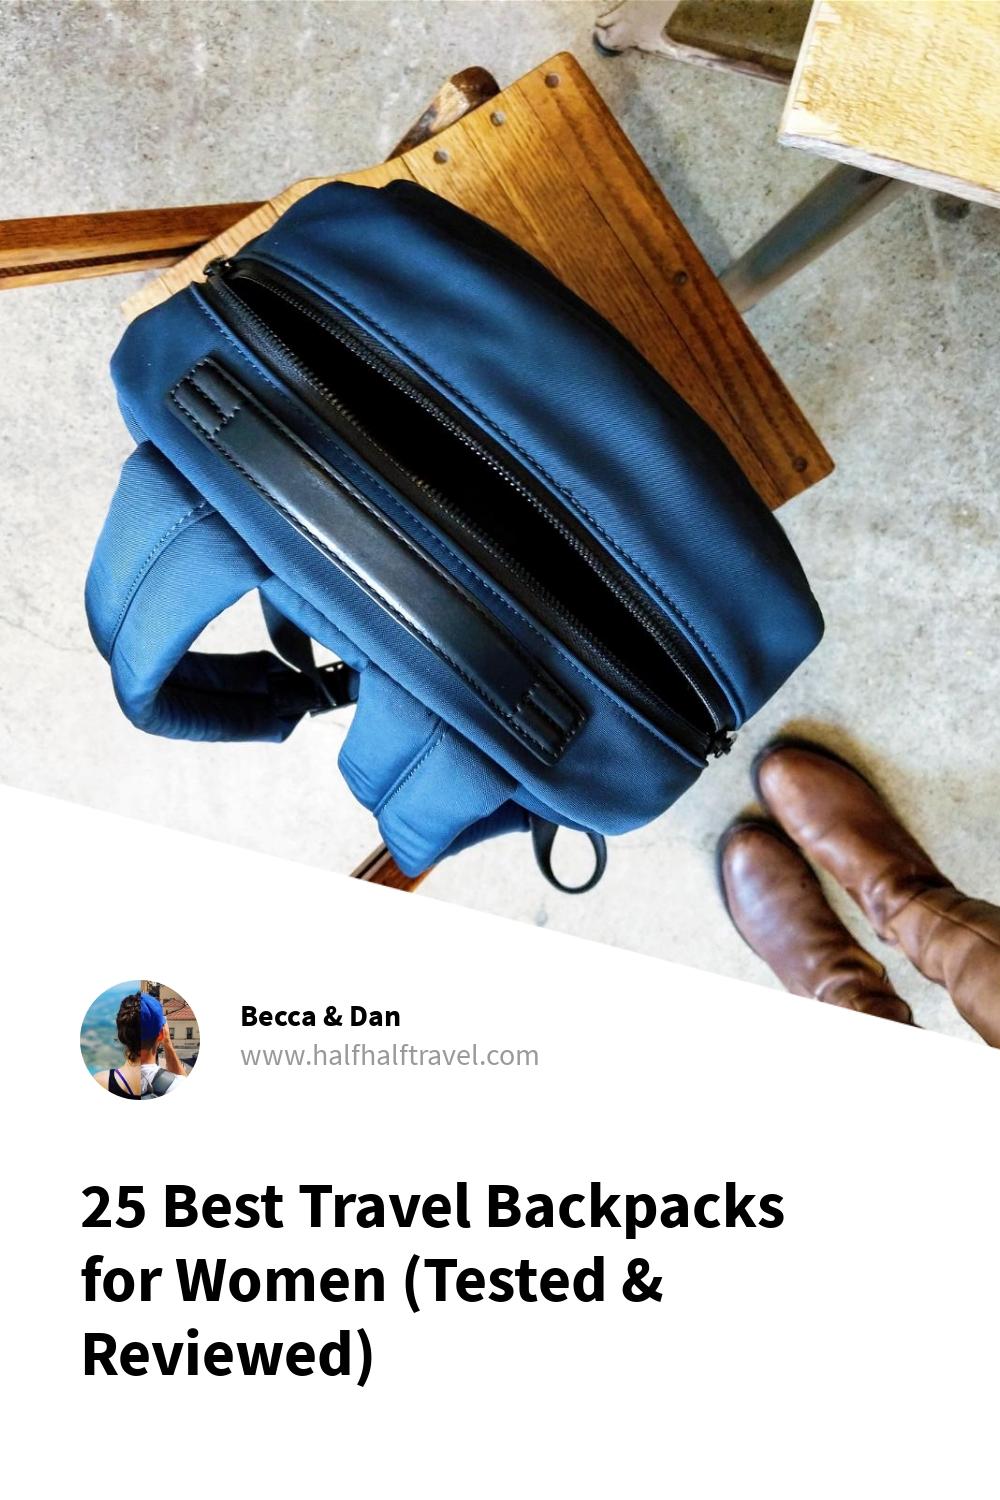 Pinterest image from the '25 Best Travel Backpacks for Women (Tested & Reviewed)' article on Half Half Travel